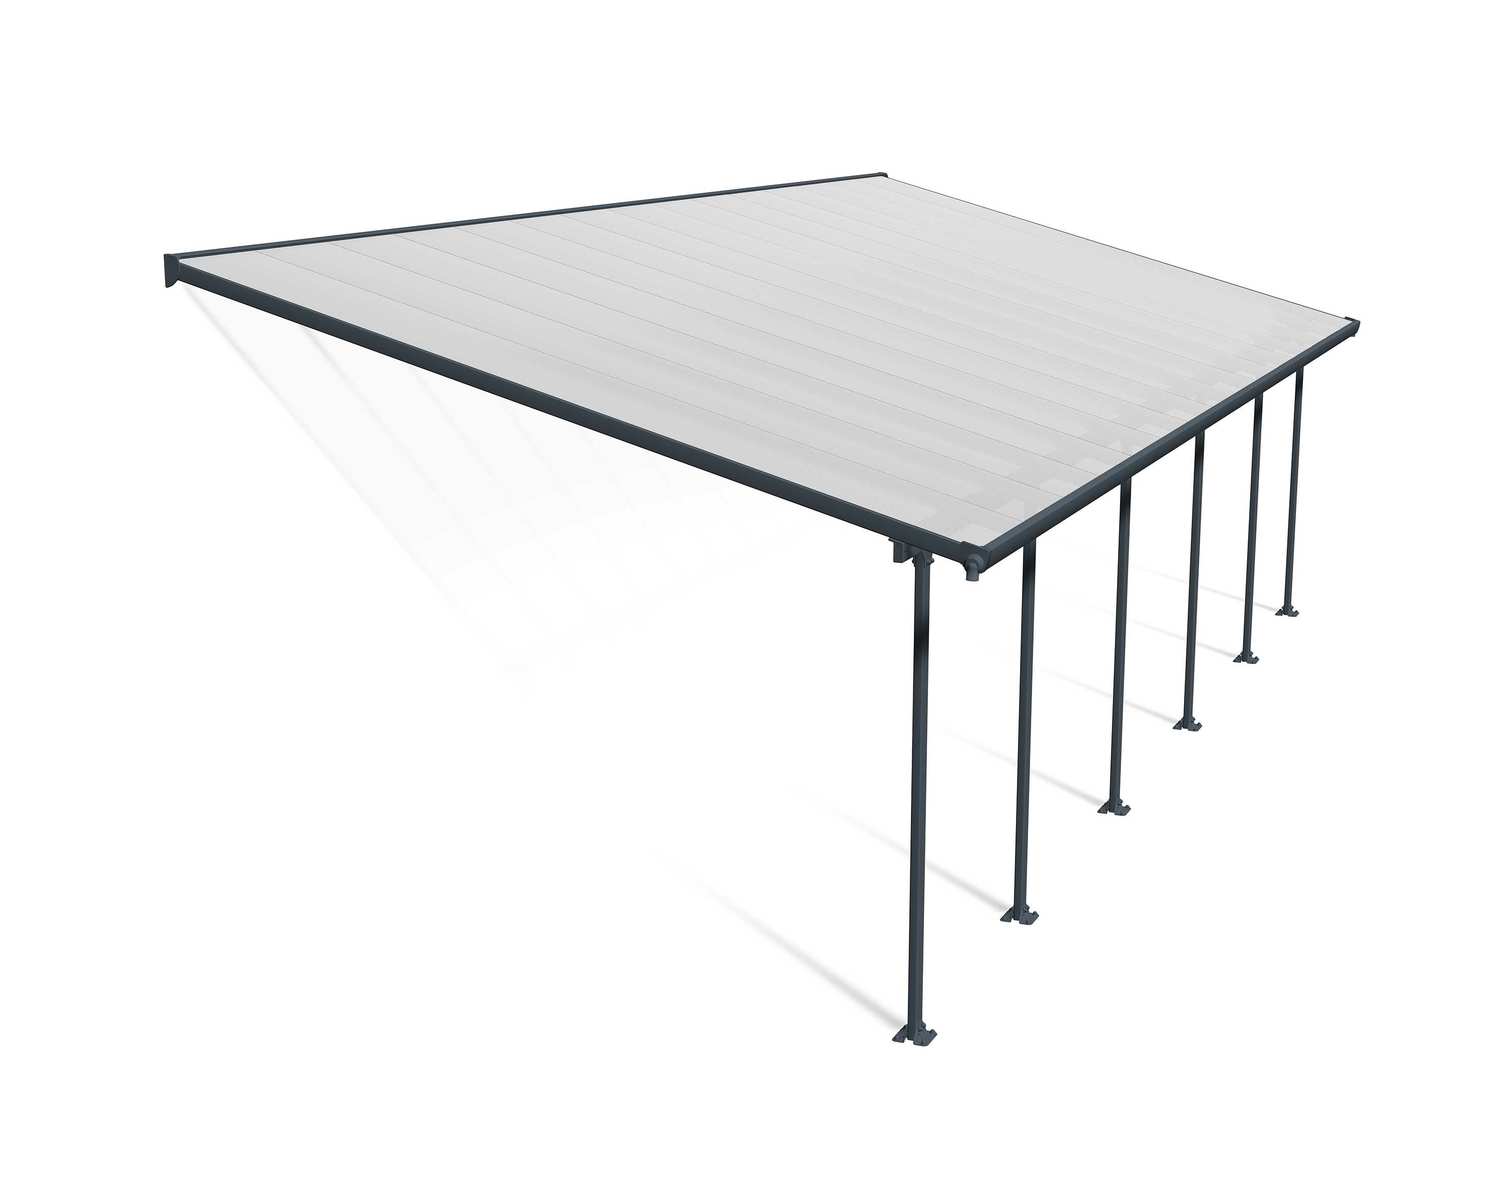 Feria 13 ft. x 34 ft. Grey Aluminium Patio Cover With 6 Posts, Clear Twin-Wall Polycarbonate Roof Panels.